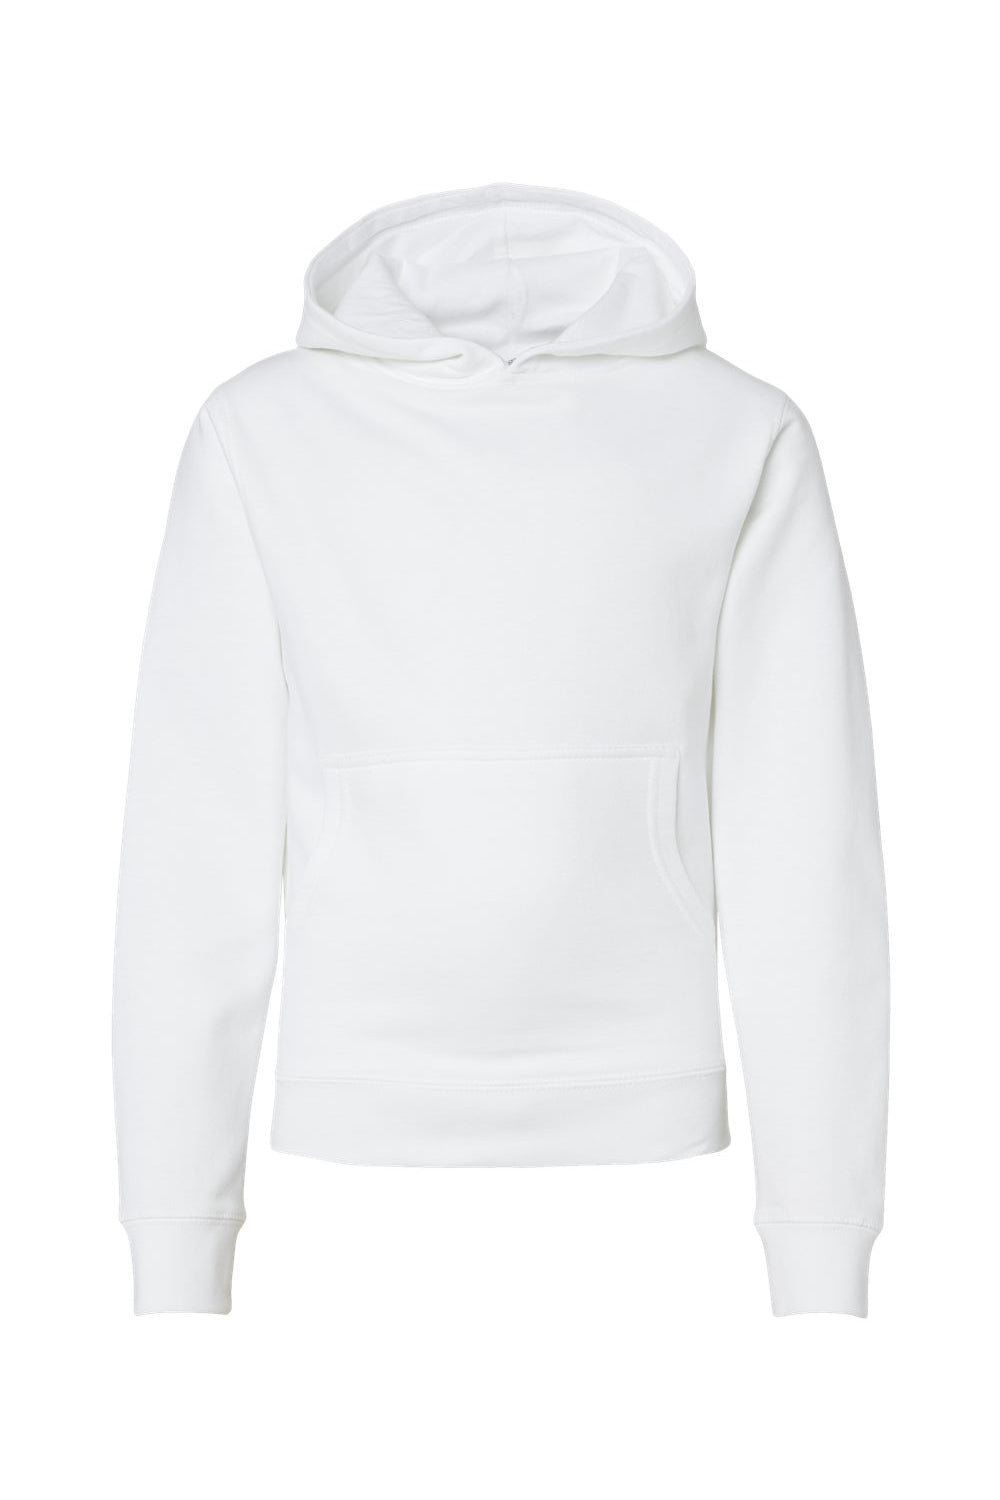 Independent Trading Co. SS4001Y Youth Hooded Sweatshirt Hoodie White Flat Front